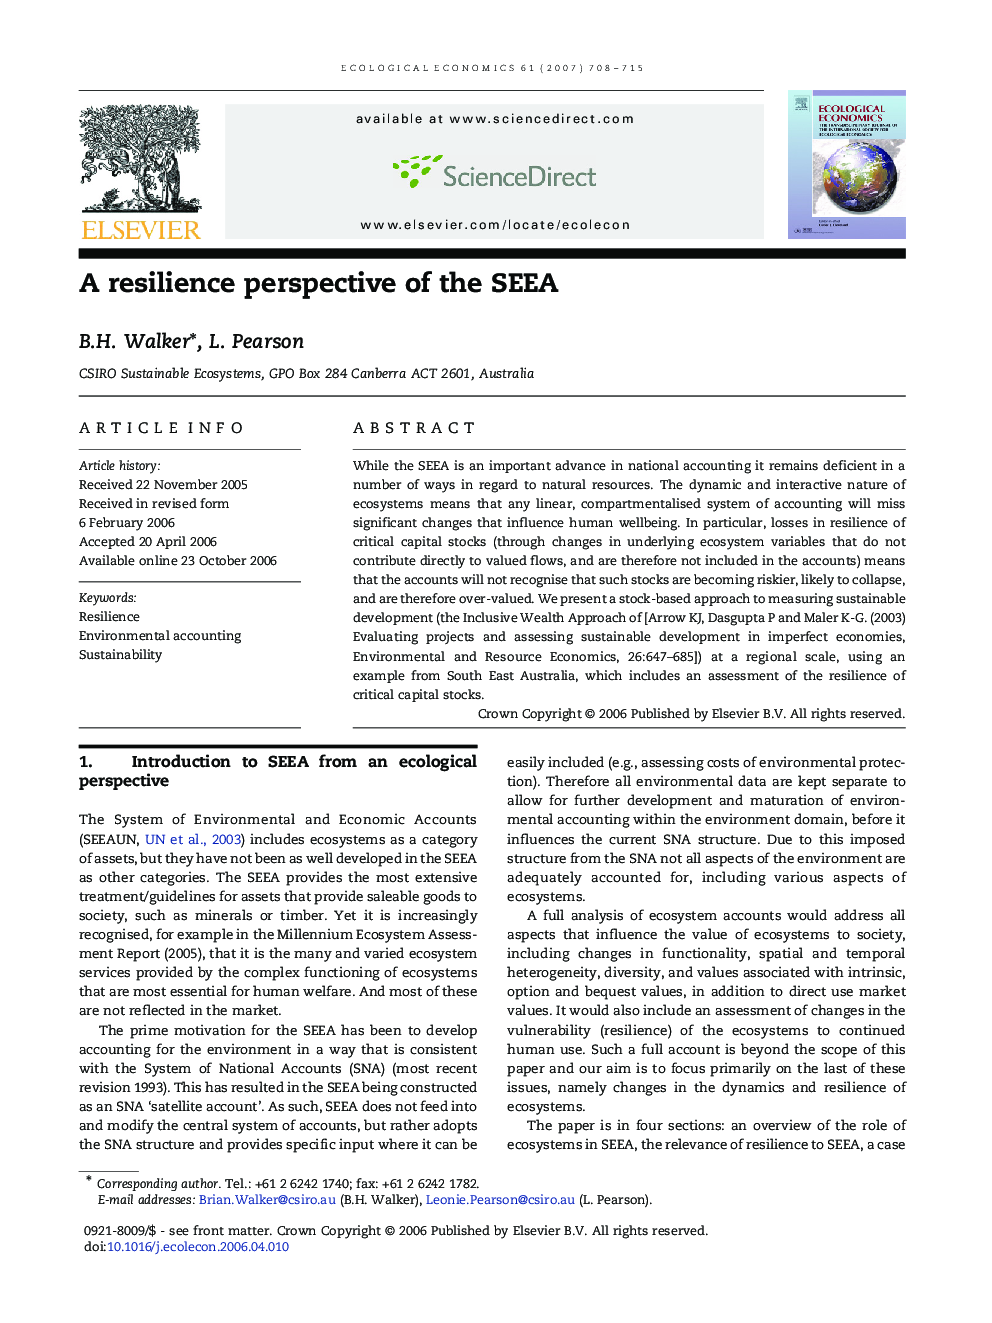 A resilience perspective of the SEEA